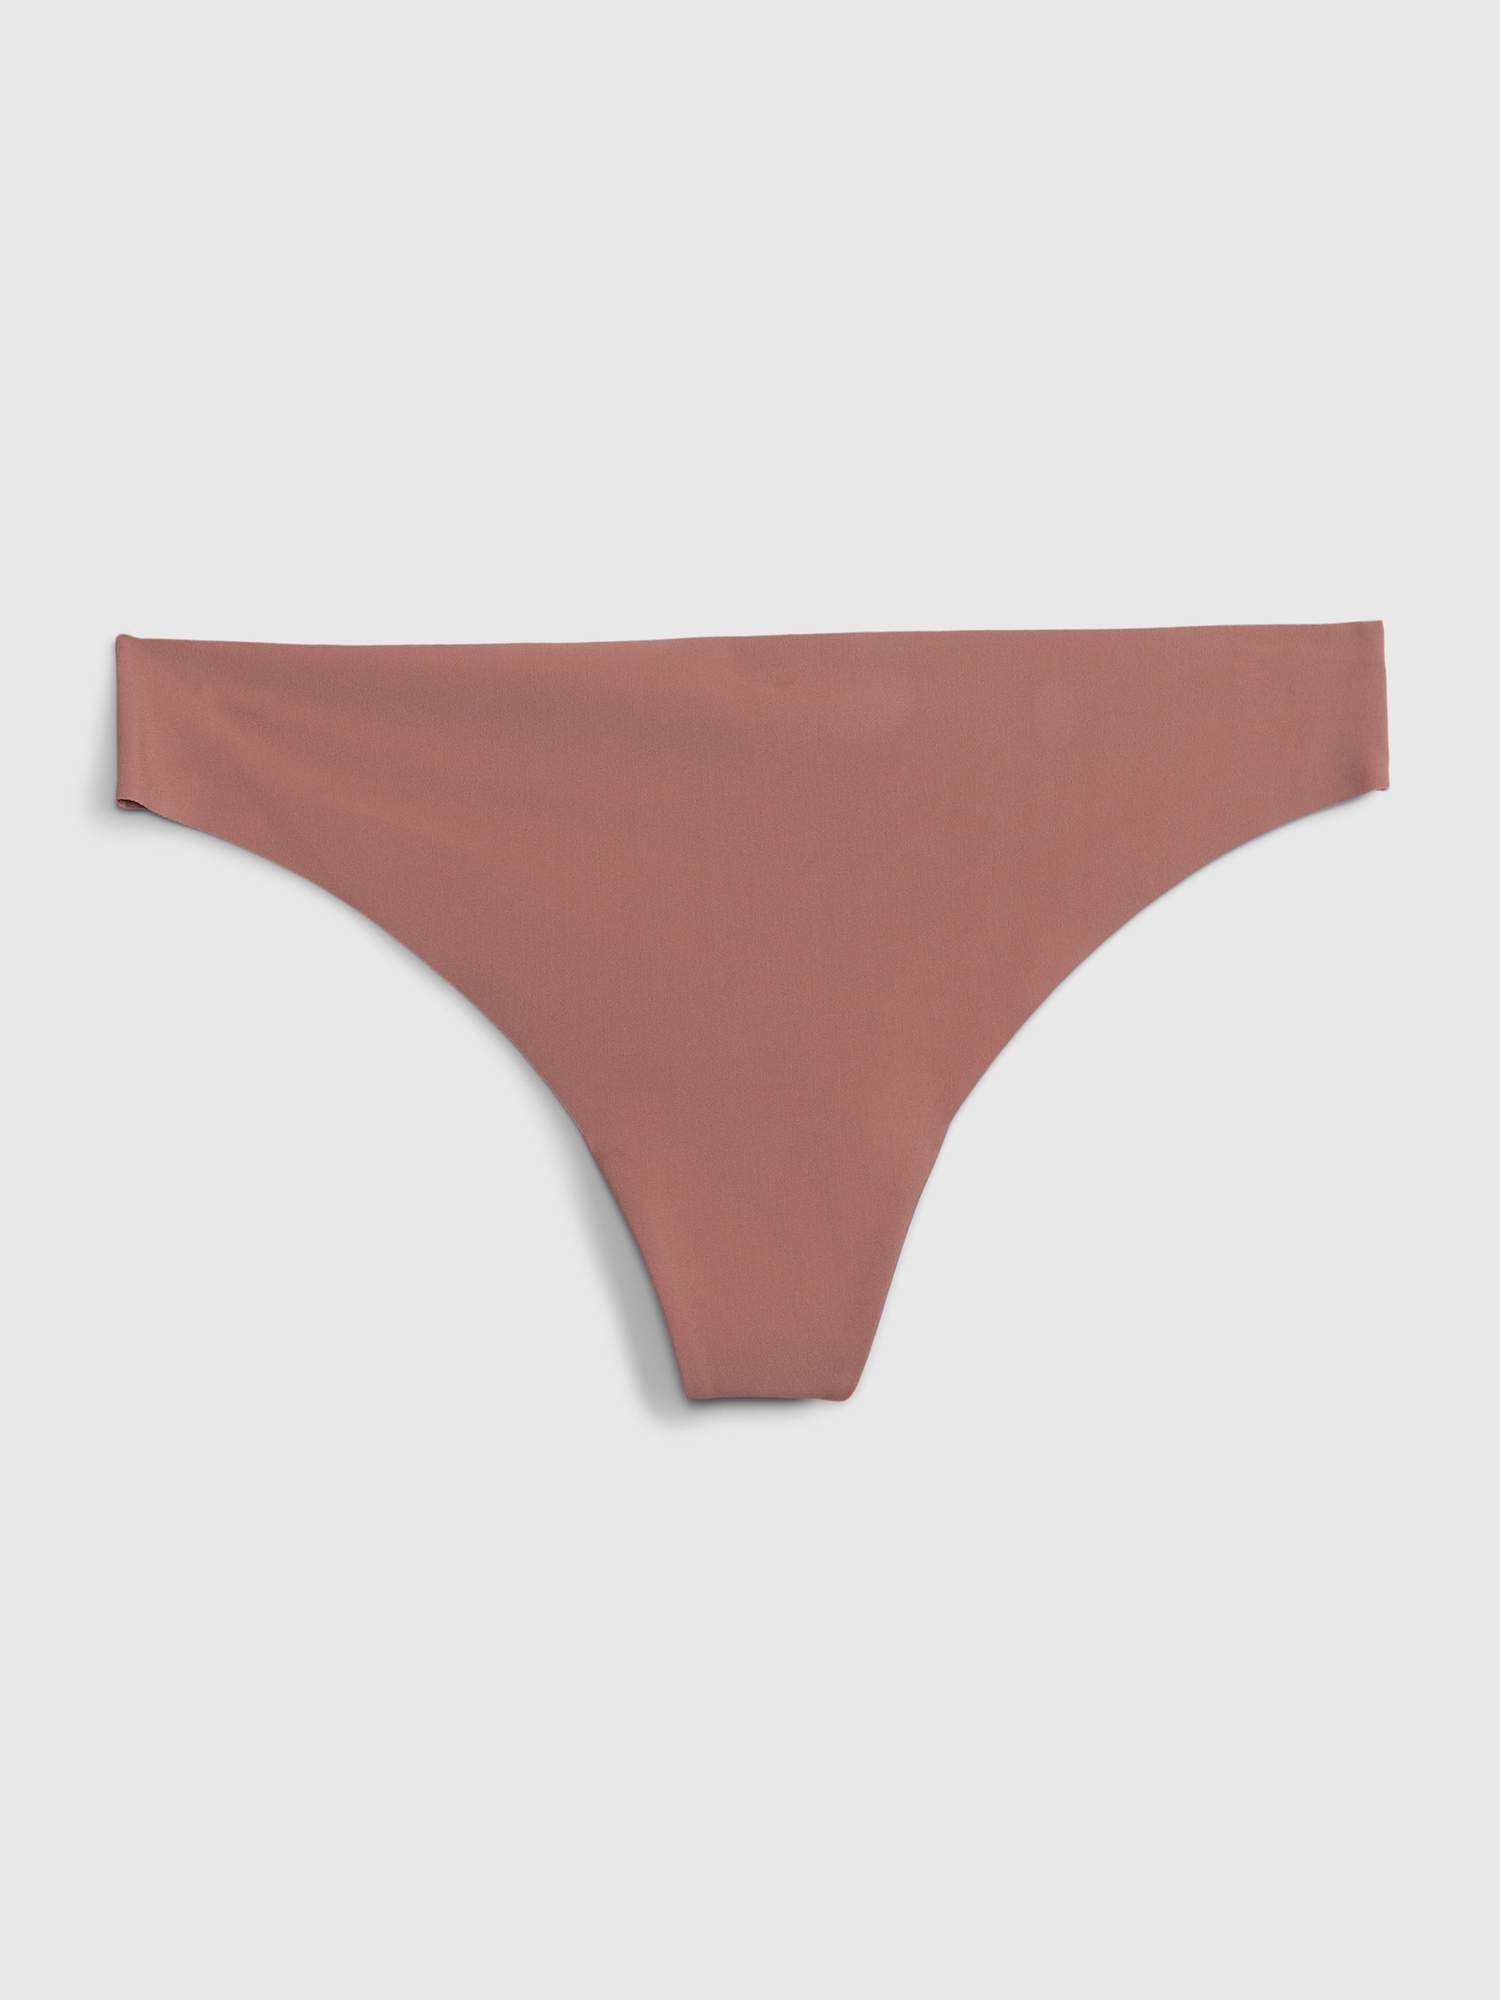 Microfiber No-show Thong Panty - Dusty pink